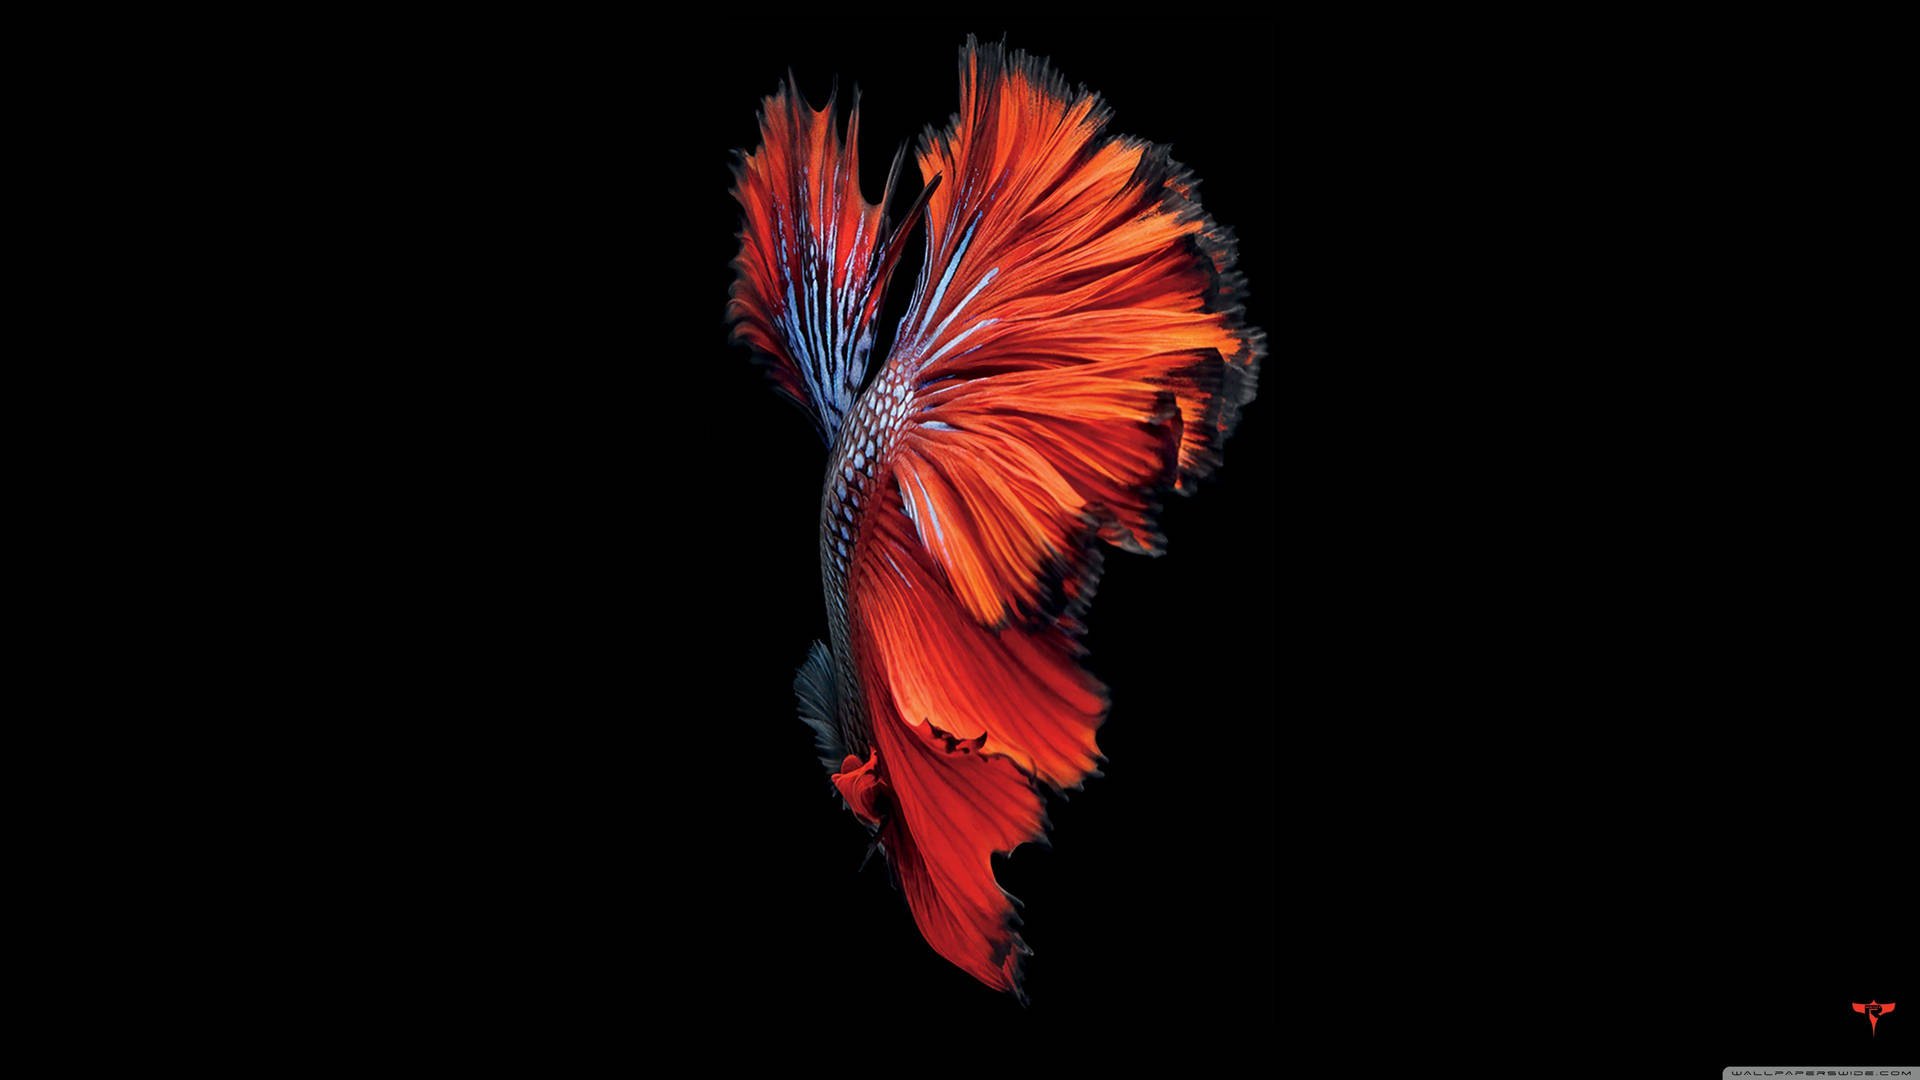 A Vibrant Red Fish Swimming Through A Crystal-clear Ocean. Background